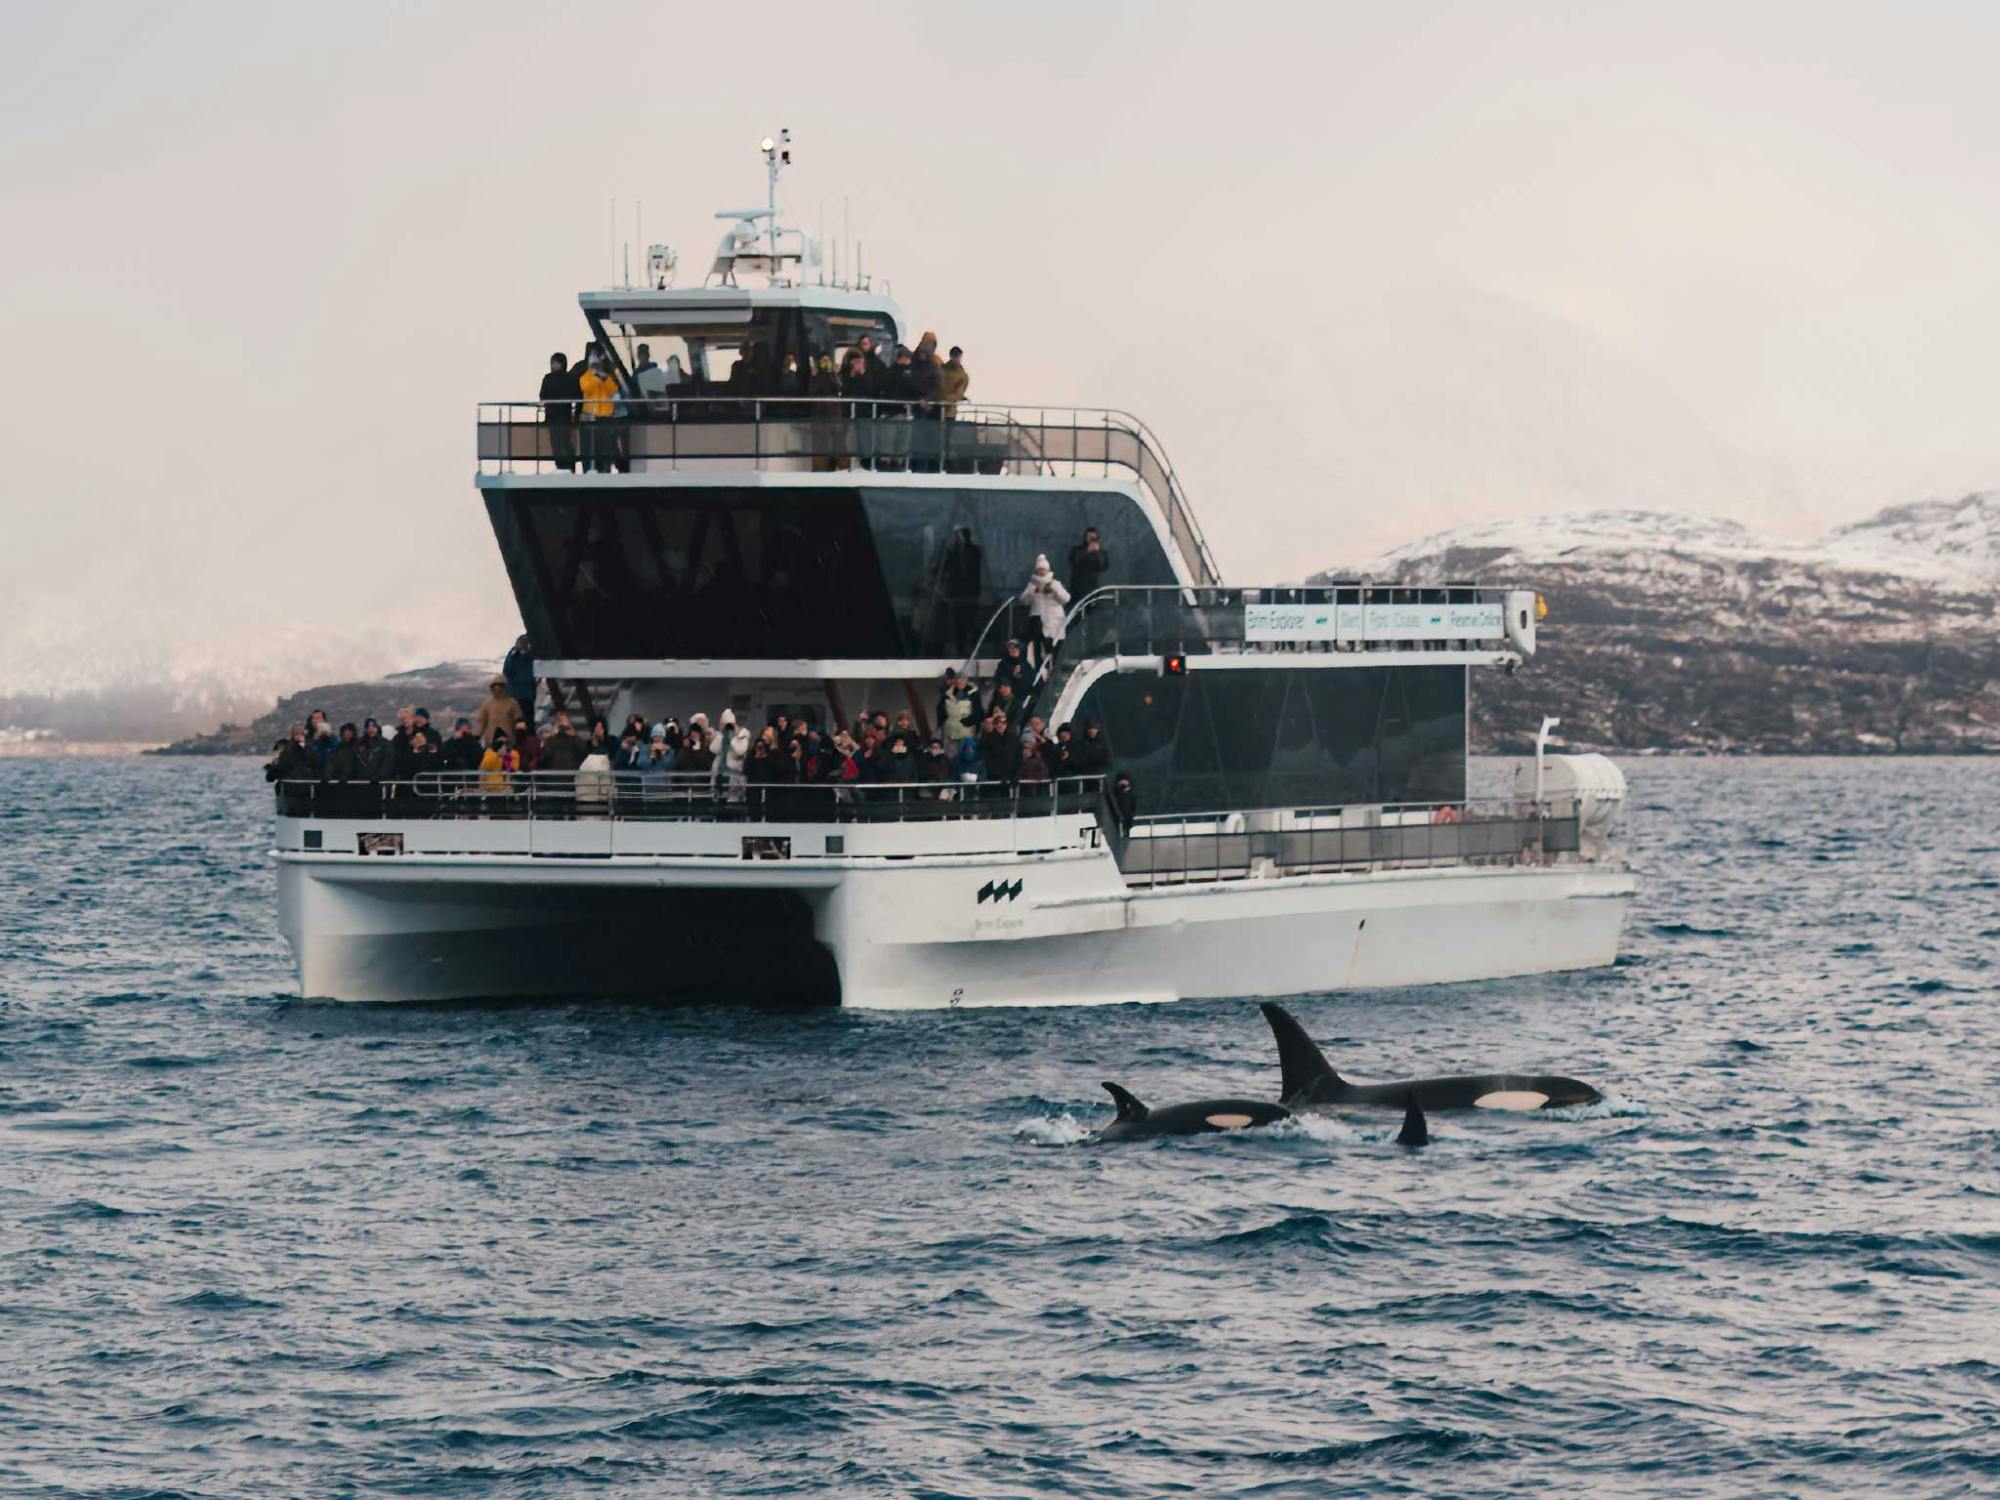 Silent whale watching tour by boat Musement